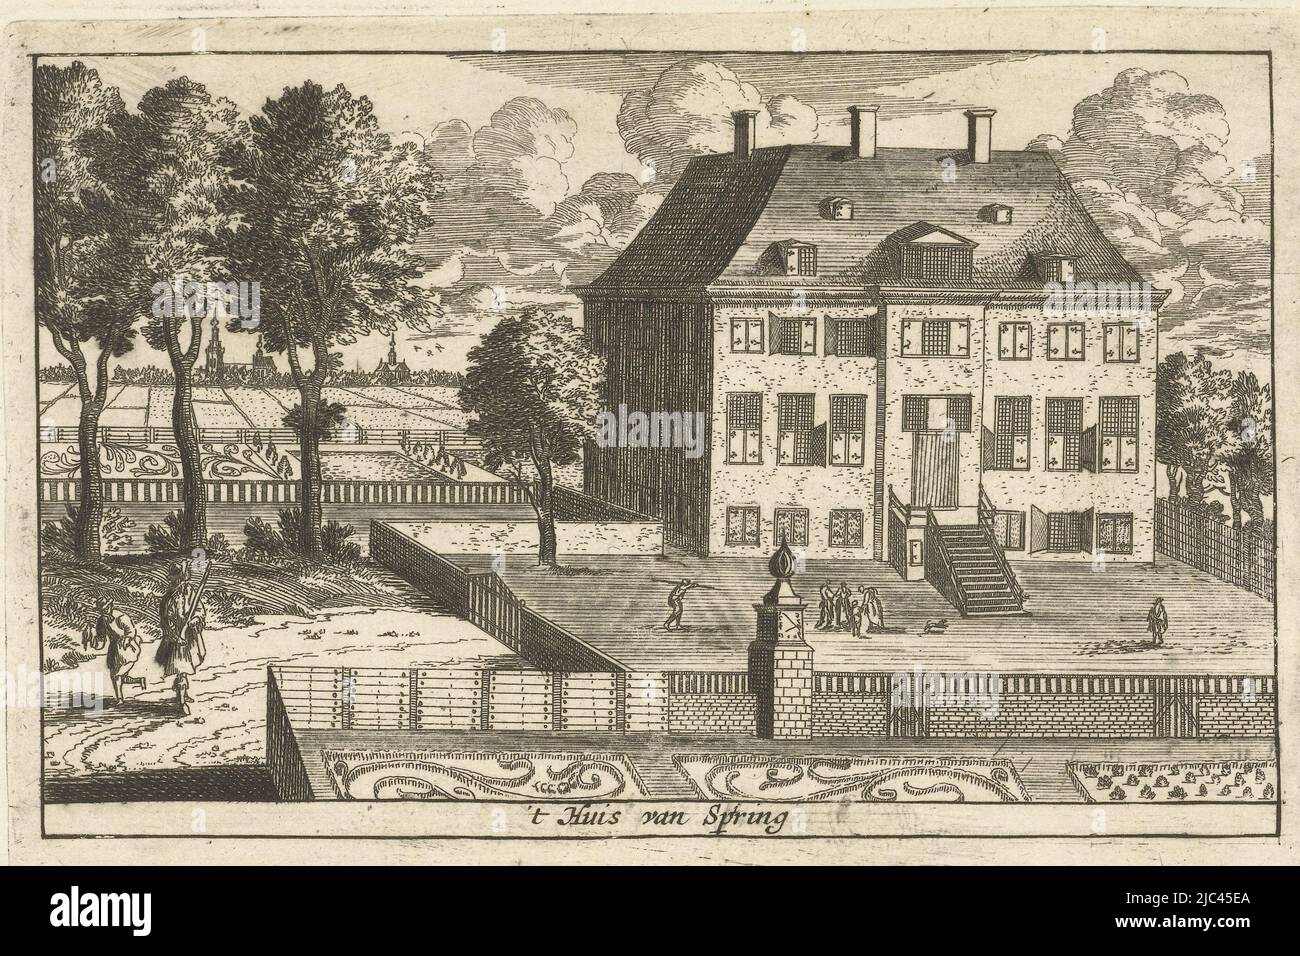 A country house with garden depicting several people and a dog. Part of a mirror symmetrical garden is visible in the foreground and a sundial on the stone pillar of the fence. On the path outside the gardens are a falconer and a hunter., Country house with falconer 't Huis van Spring (title on object) 't Huis van Spiring (title on object), print maker: Cornelis Elandts, The Hague, 1663 - 1670, paper, etching, h 116 mm × w 168 mm Stock Photo